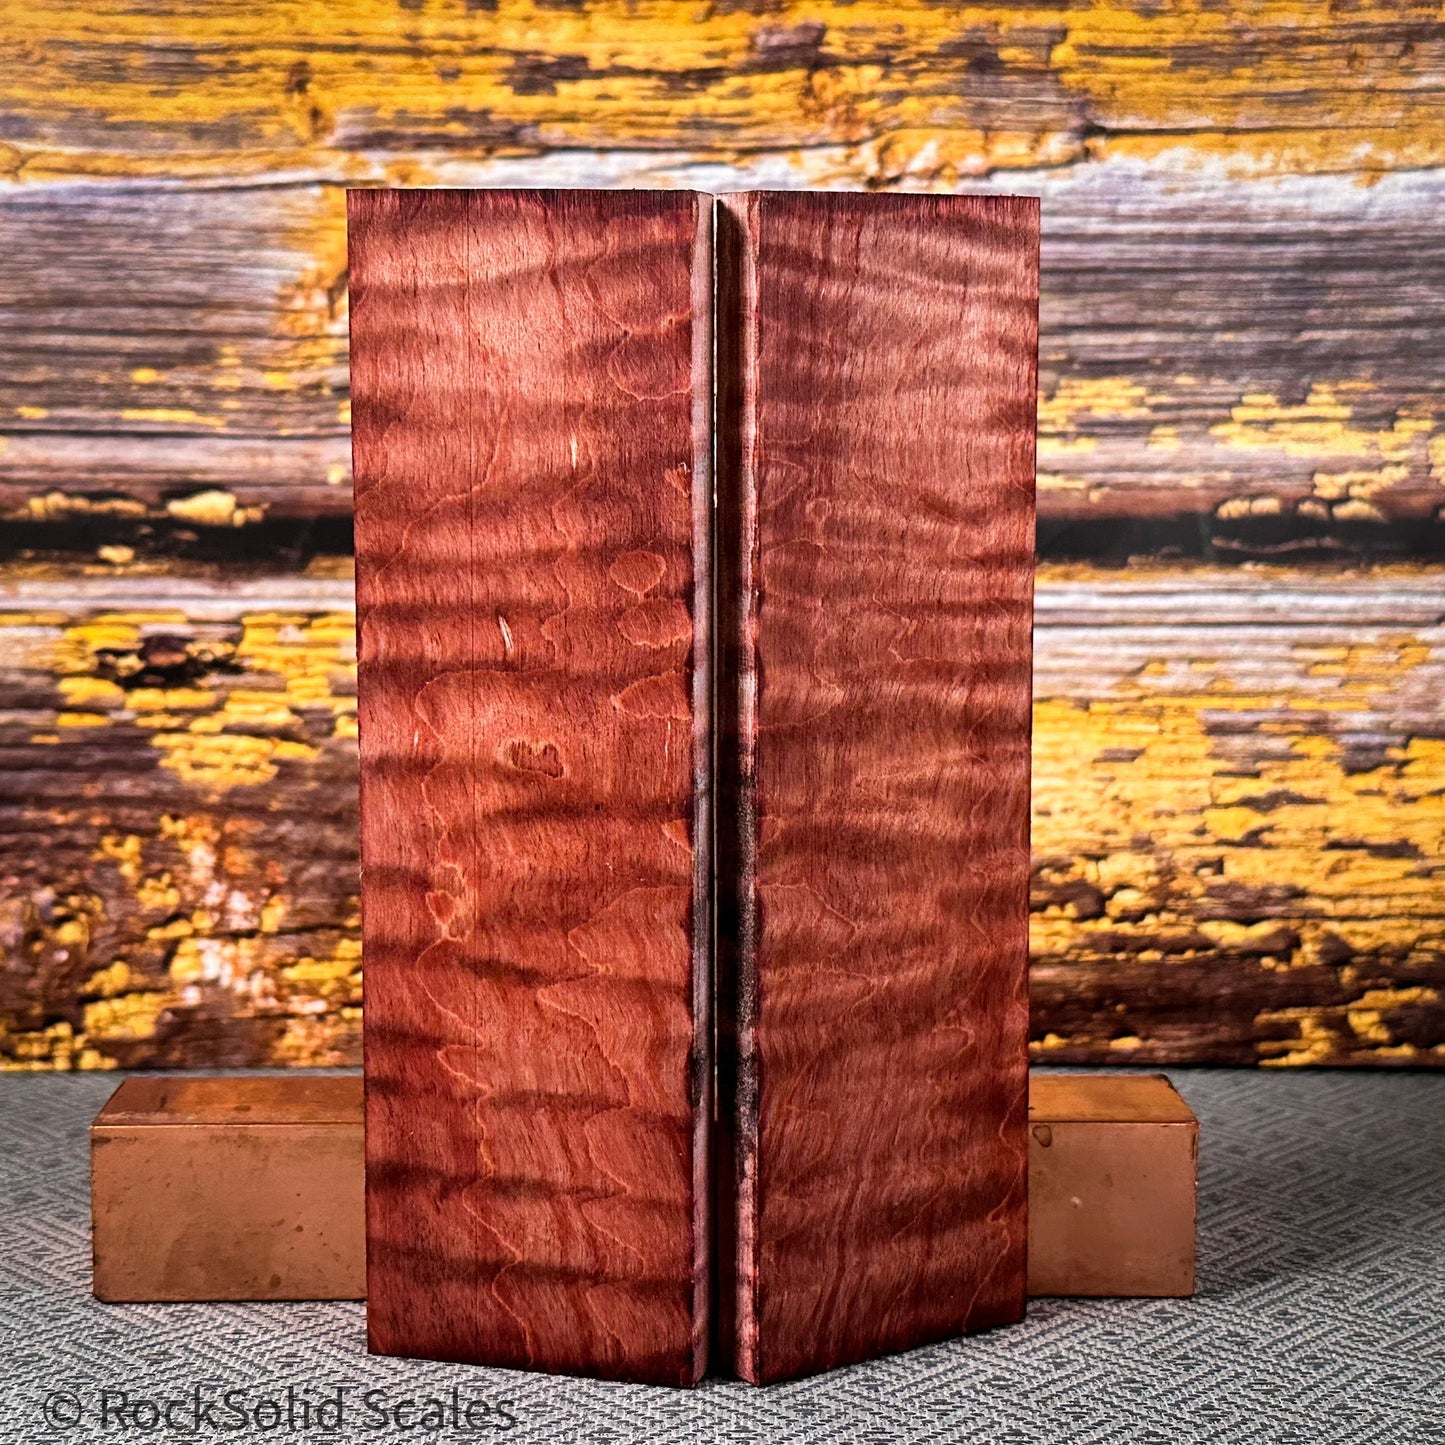 #2358 - Magenta and Orange Double Dyed Curly Maple - Bargain Bin - RockSolid Scales -